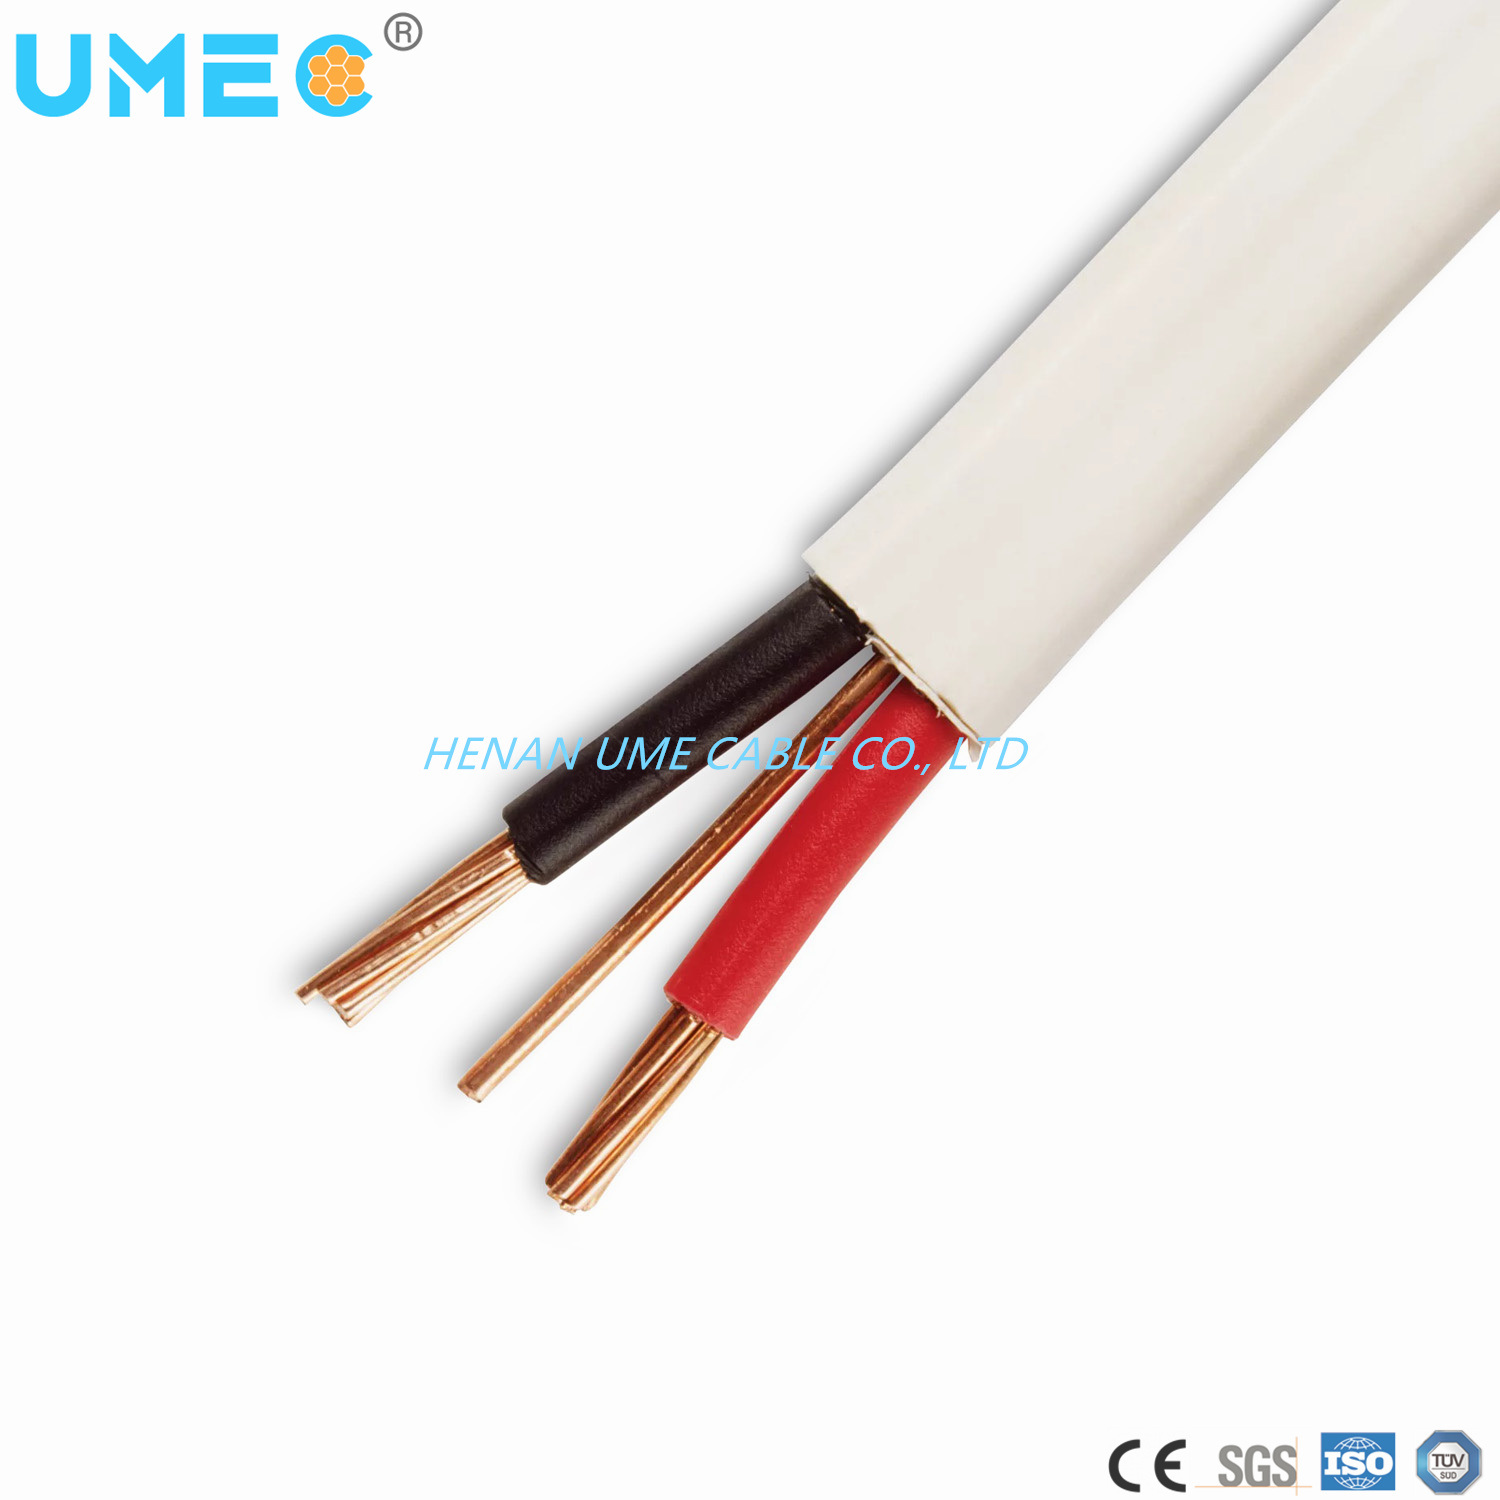 Electrical Copper Conductor PVC Insulated PVC Sheathed Wire BVVB